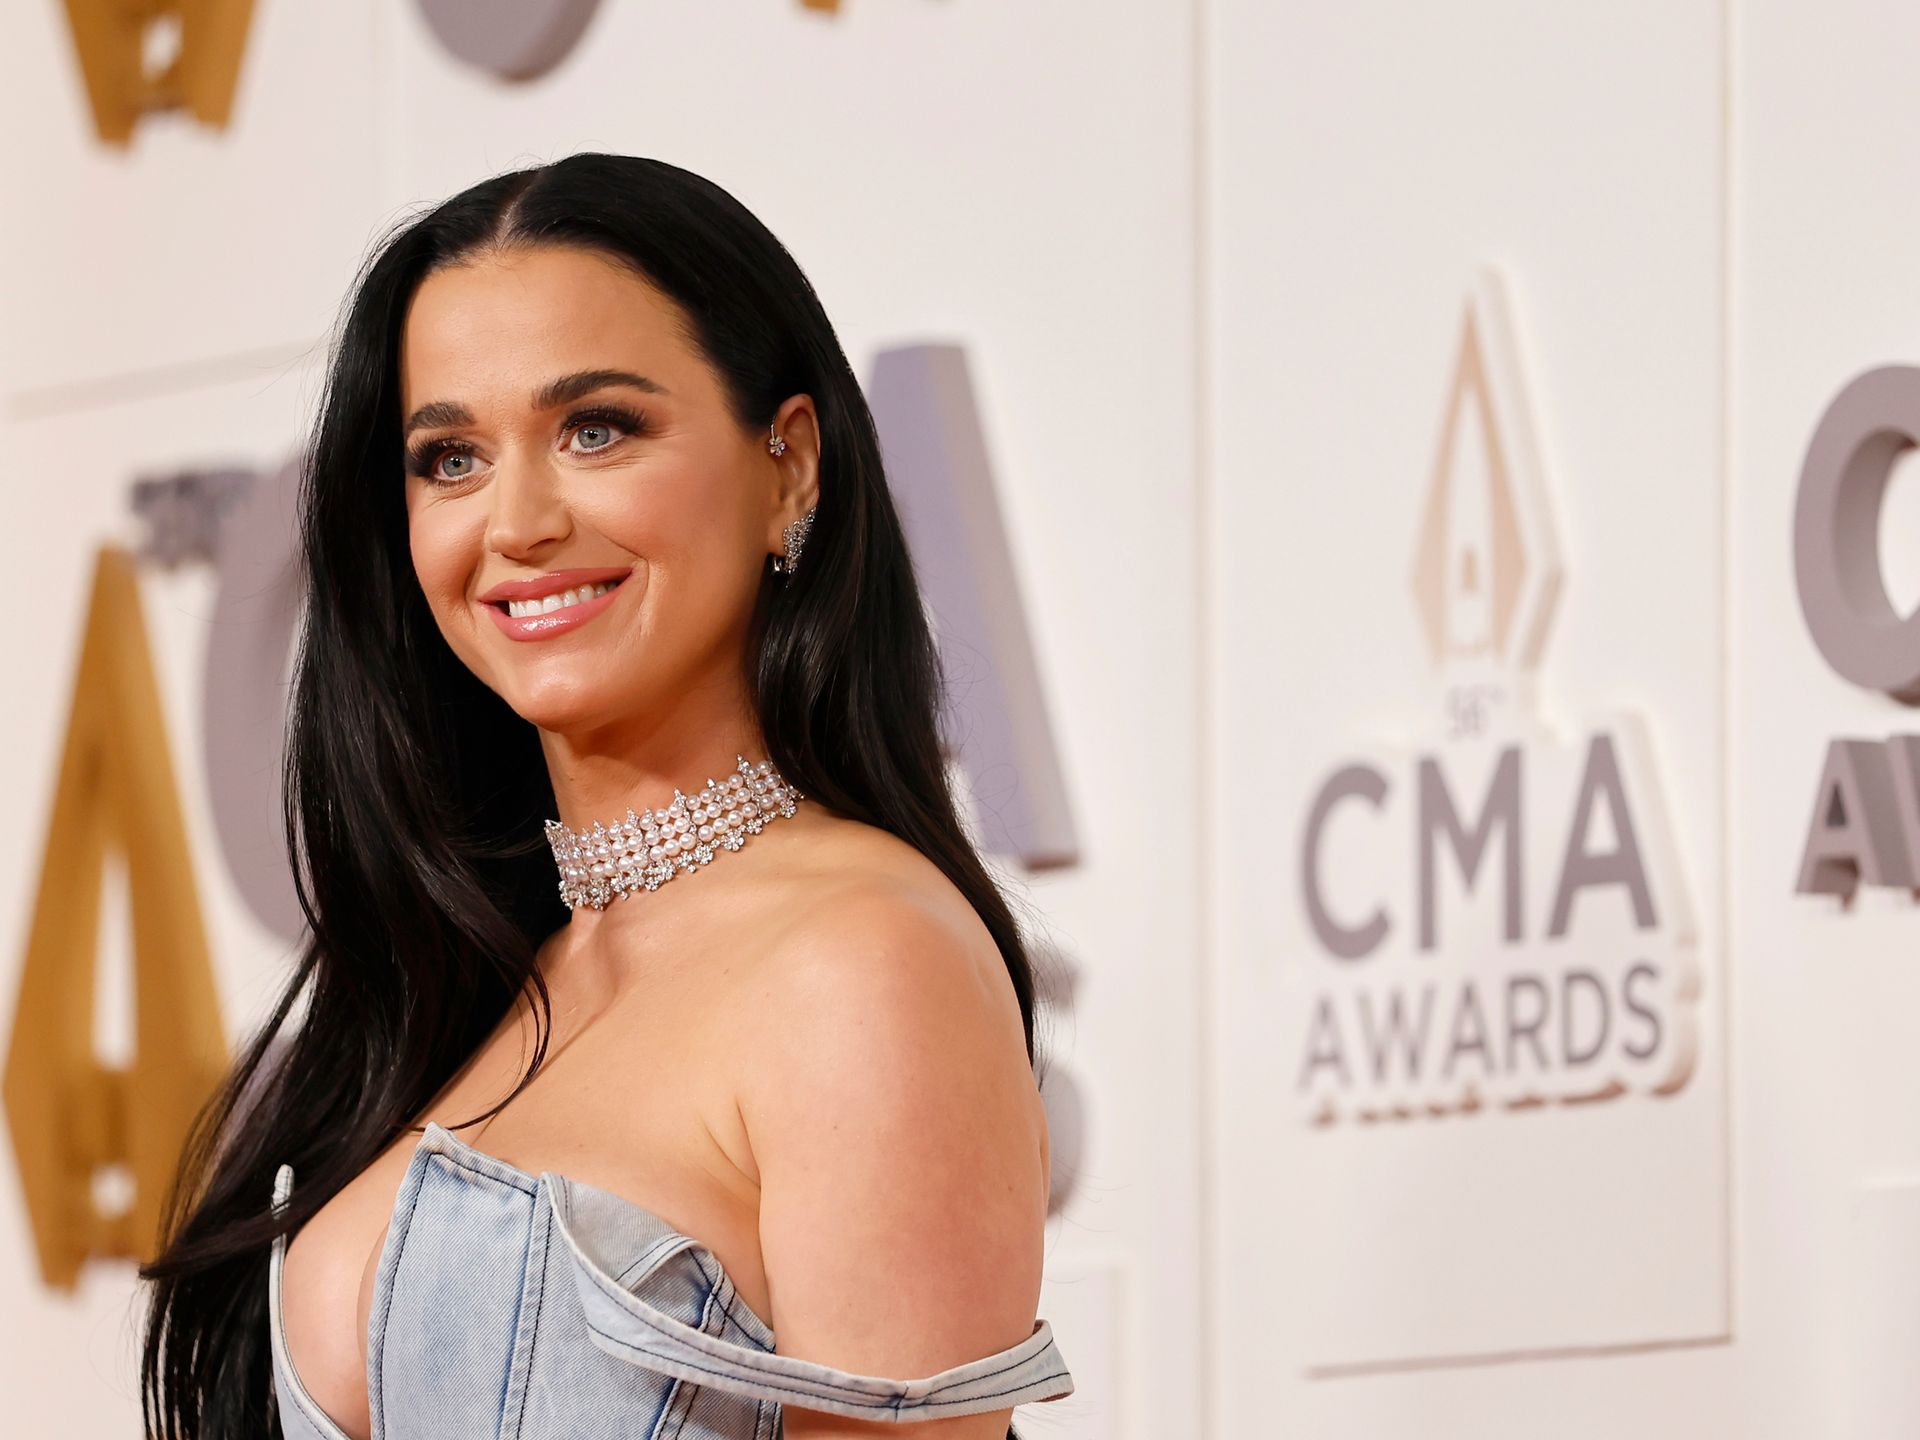 Katy Perry leaves fans in awe with emotional anniversary tribute fans can't  believe – see her epic throwback photos | HELLO!